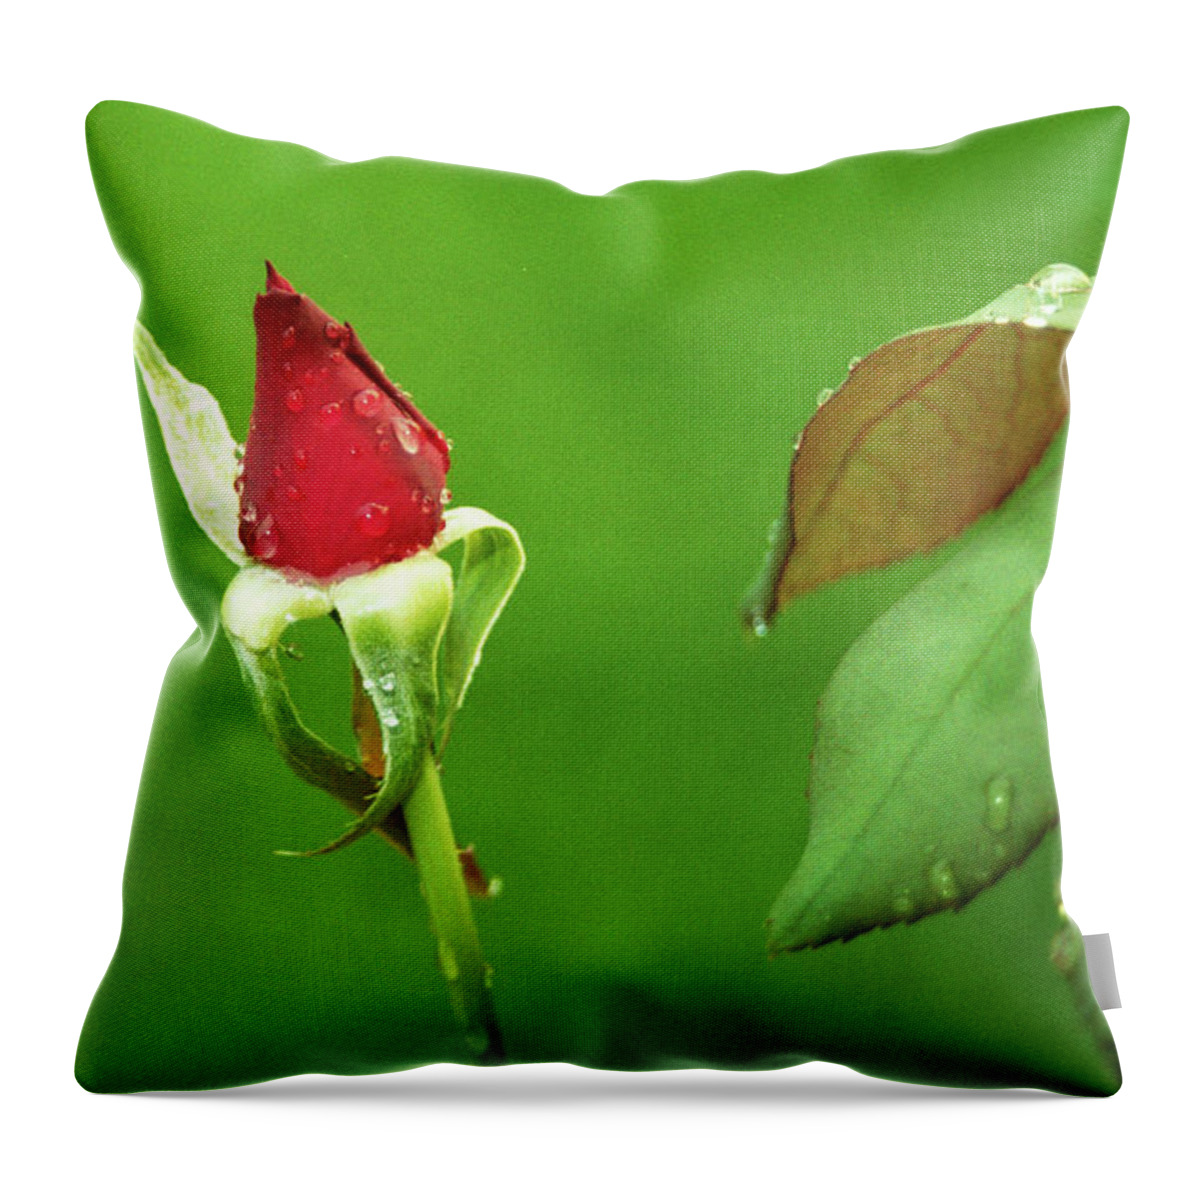 Rose Throw Pillow featuring the digital art After the Storm by Brad Barton